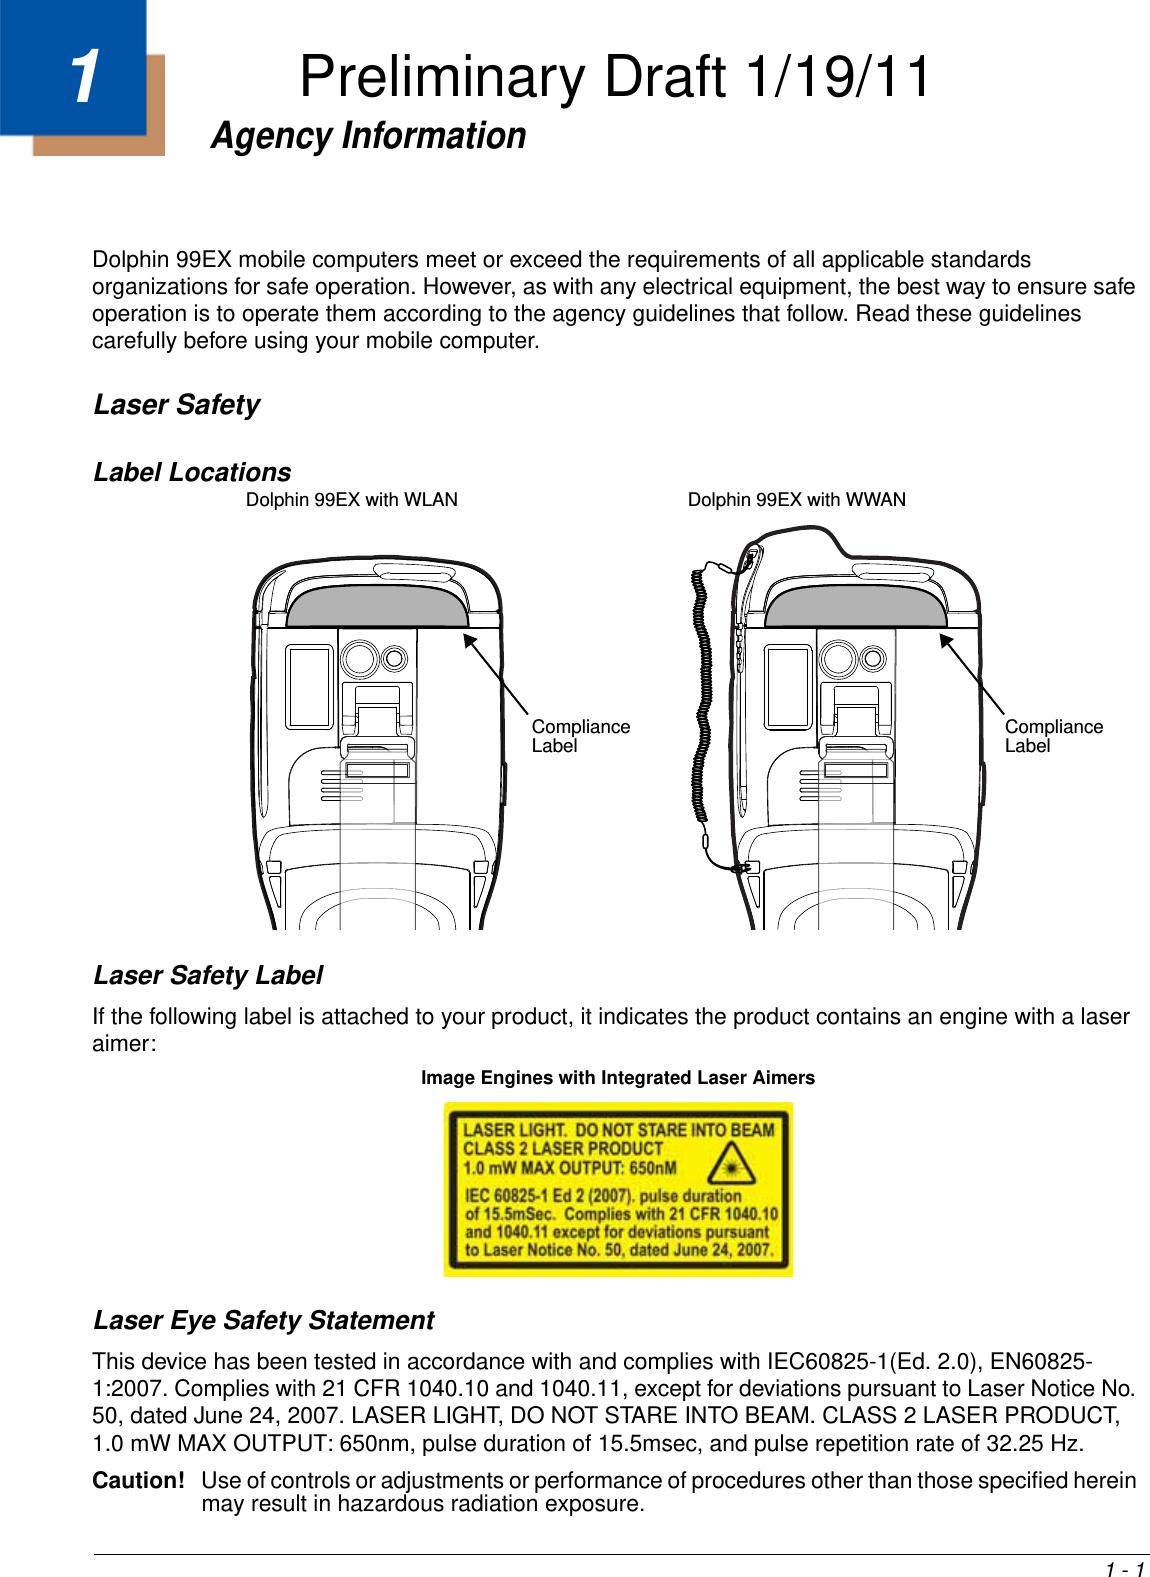 1 - 11Agency InformationDolphin 99EX mobile computers meet or exceed the requirements of all applicable standards organizations for safe operation. However, as with any electrical equipment, the best way to ensure safe operation is to operate them according to the agency guidelines that follow. Read these guidelines carefully before using your mobile computer.Laser SafetyLabel LocationsLaser Safety LabelIf the following label is attached to your product, it indicates the product contains an engine with a laser aimer: Laser Eye Safety StatementThis device has been tested in accordance with and complies with IEC60825-1(Ed. 2.0), EN60825-1:2007. Complies with 21 CFR 1040.10 and 1040.11, except for deviations pursuant to Laser Notice No. 50, dated June 24, 2007. LASER LIGHT, DO NOT STARE INTO BEAM. CLASS 2 LASER PRODUCT, 1.0 mW MAX OUTPUT: 650nm, pulse duration of 15.5msec, and pulse repetition rate of 32.25 Hz.Caution! Use of controls or adjustments or performance of procedures other than those specified herein may result in hazardous radiation exposure.                 Compliance Label Dolphin 99EX with WWANCompliance Label Dolphin 99EX with WLANImage Engines with Integrated Laser AimersPreliminary Draft 1/19/11